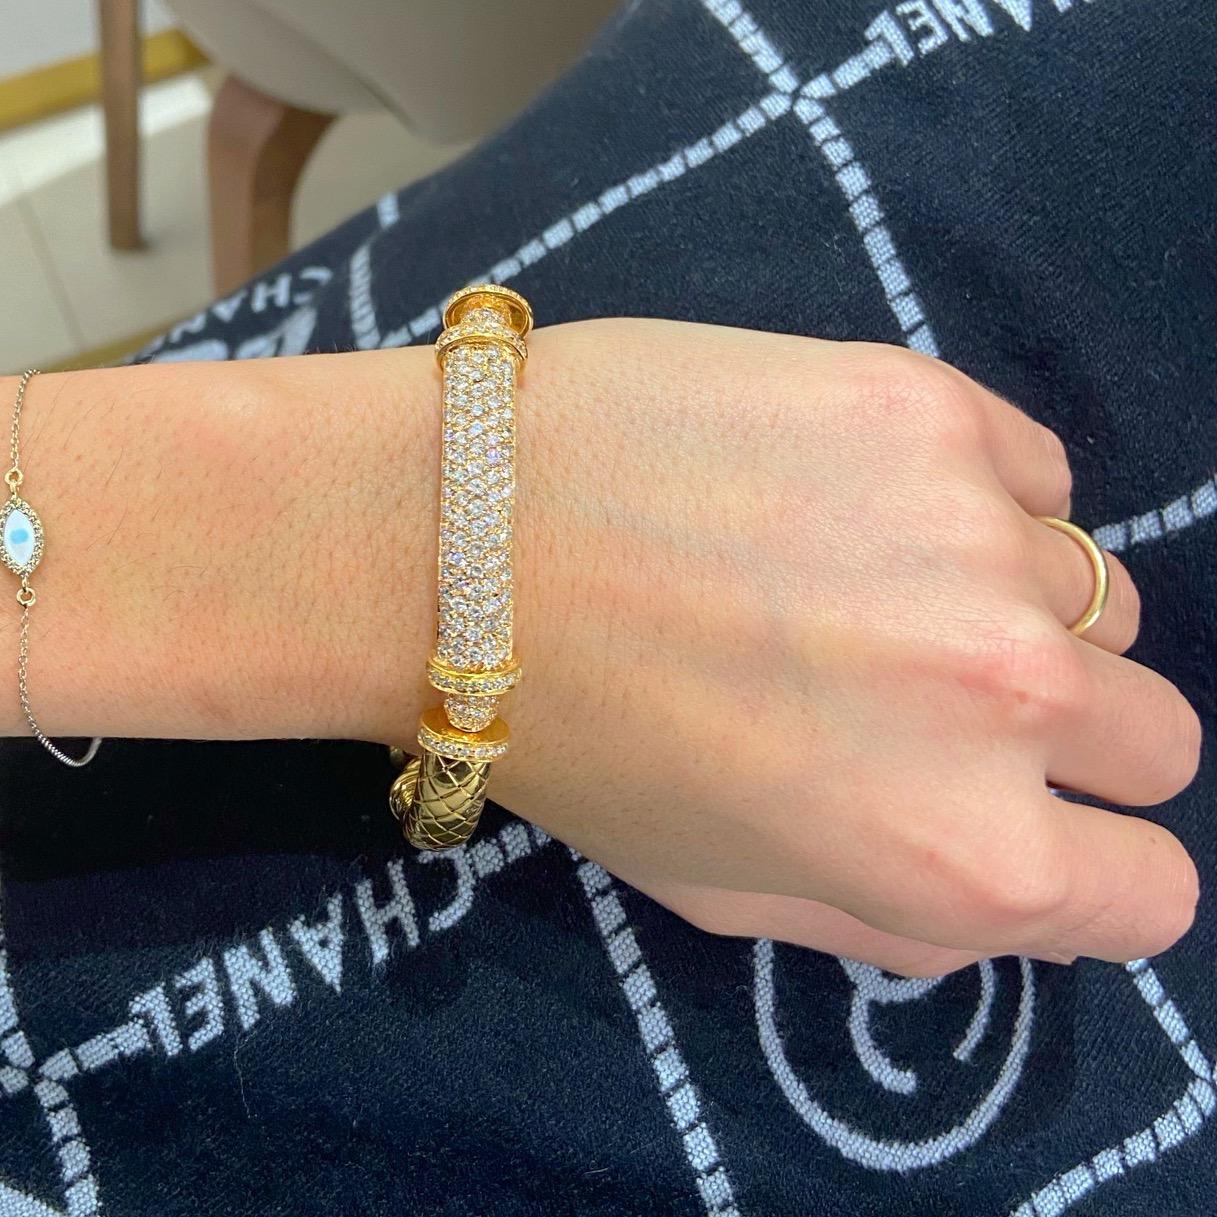 Gorgeous 18 karat pink gold bracelet. This bracelet is designed with four gold sections. The center is beautifully set with 5 rows of round brilliant diamonds. Two pave diamond rondelles accent the center section. The remaining gold sections have